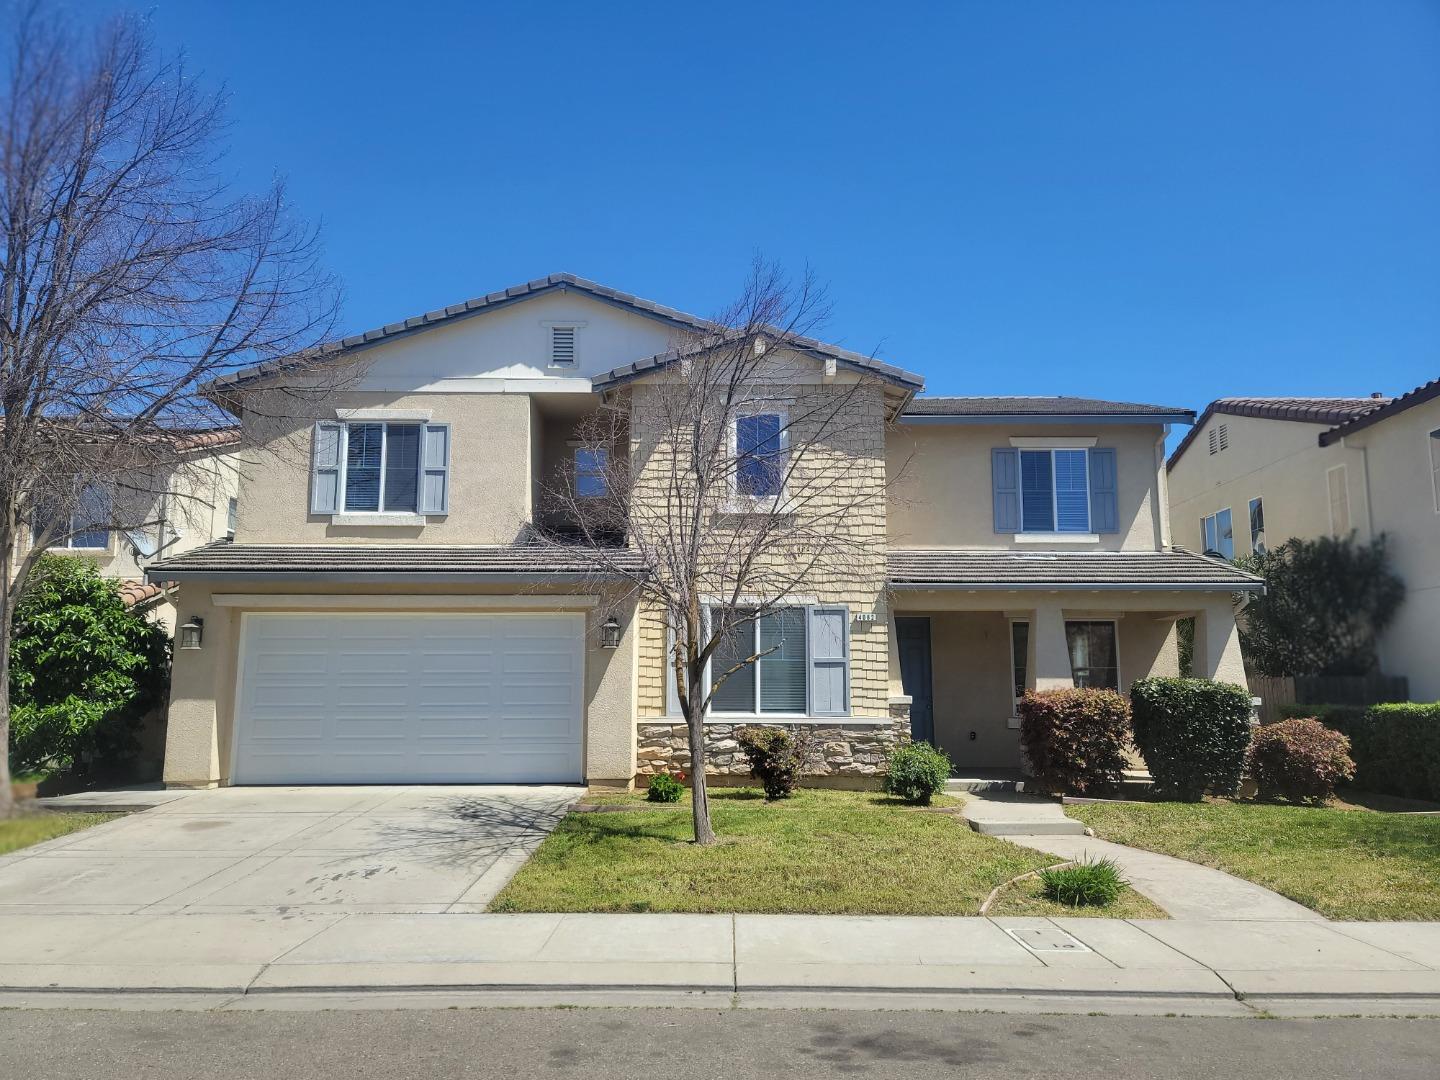 Photo of 4082 St Remy Ct in Merced, CA